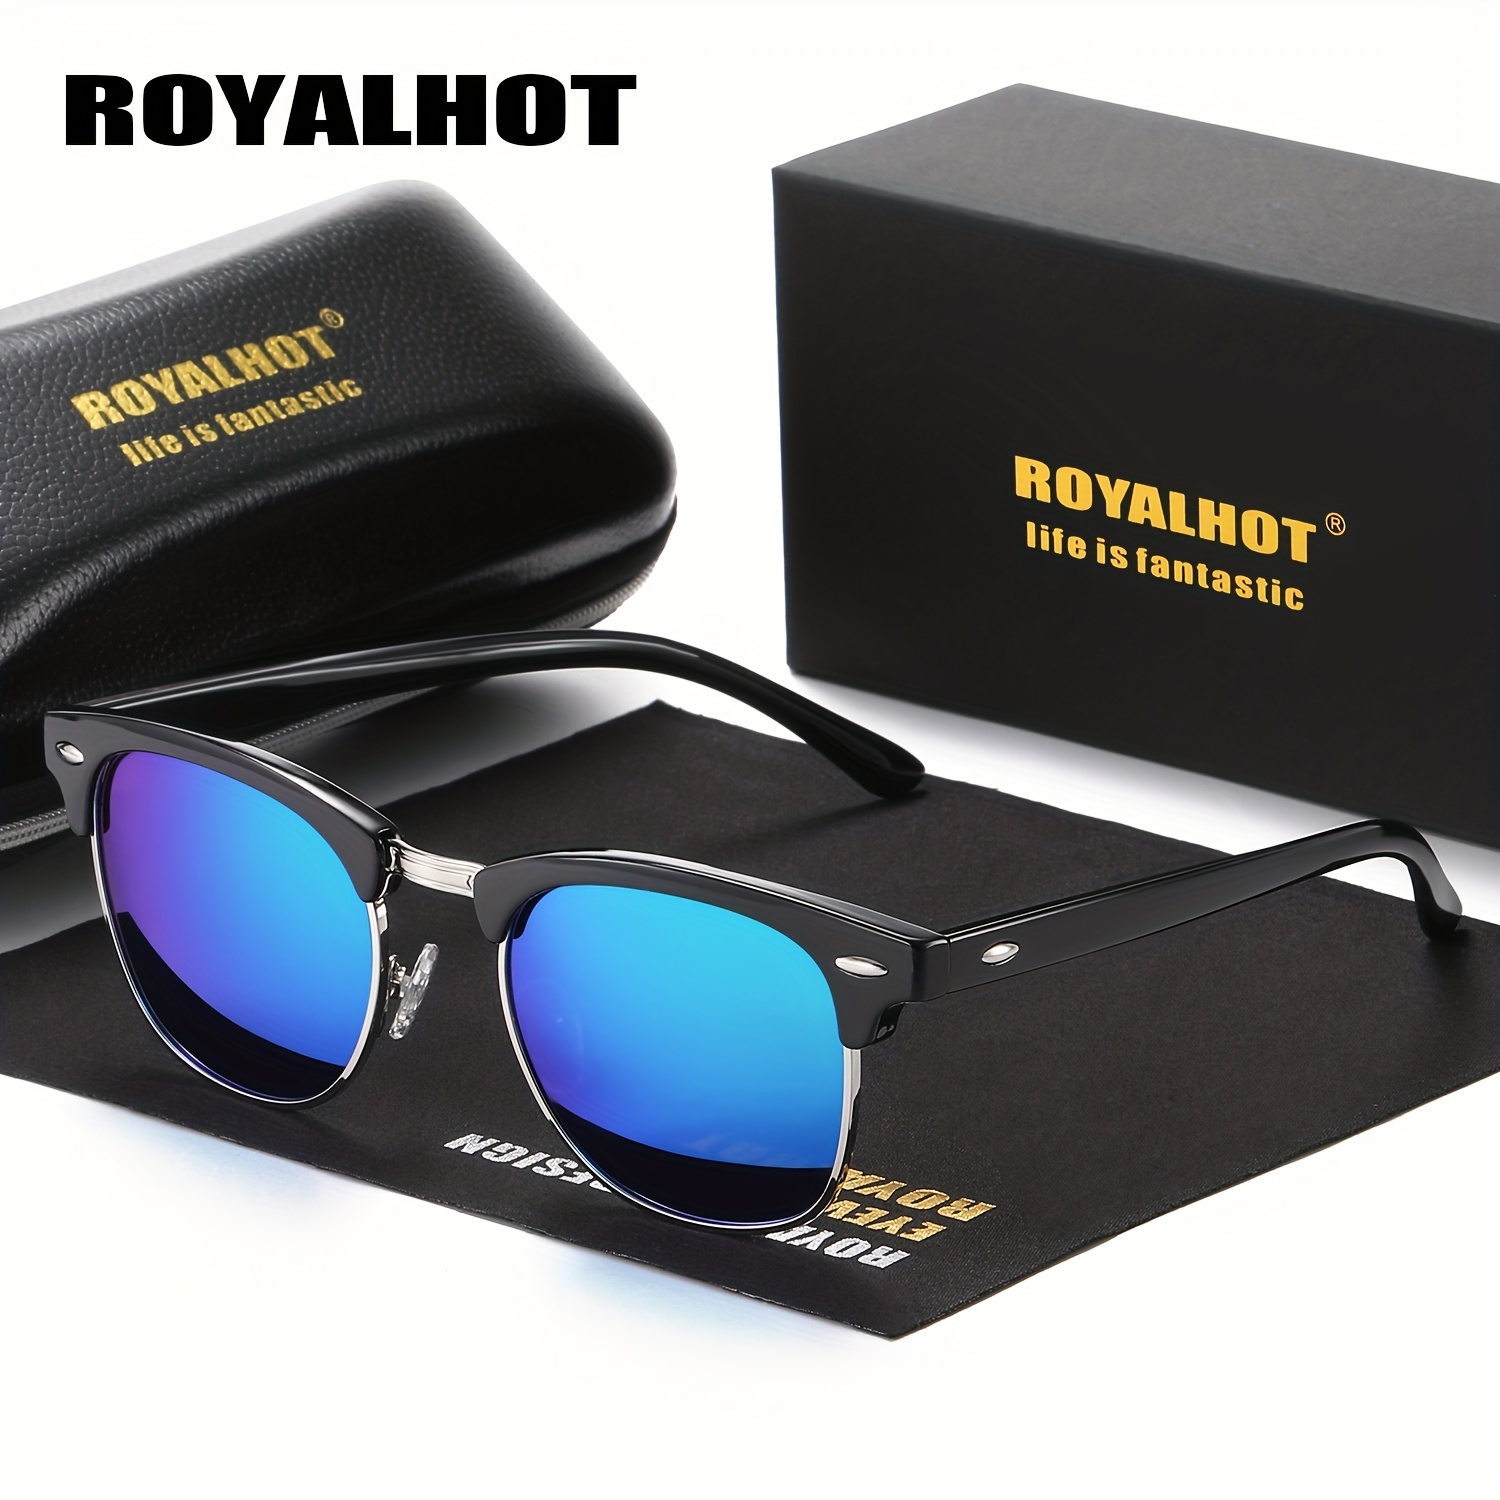 

Royalhot, Classic Retro Eyebrow Design Polarized Sunglasses, For Men Women Outdoor Sports Party Vacation Travel Driving Fishing Supply Photo Prop